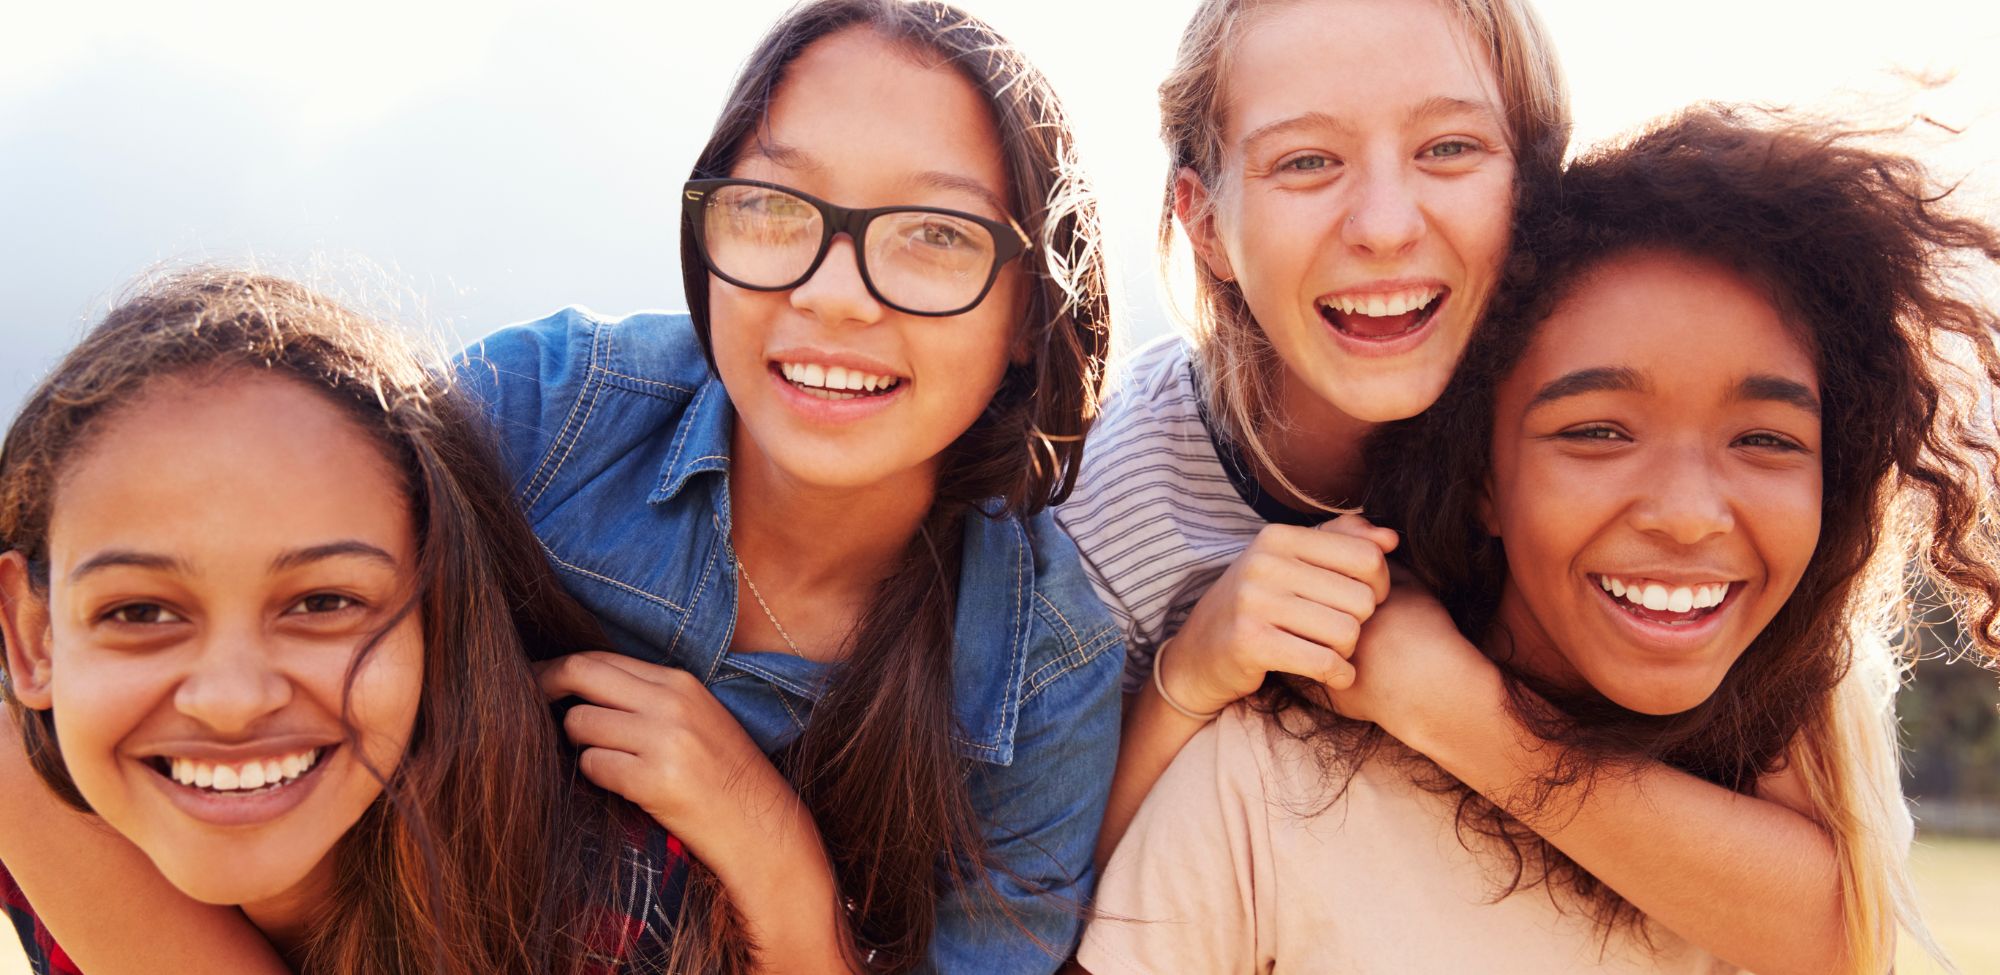 teens take a selfie together on their first day with Invisalign